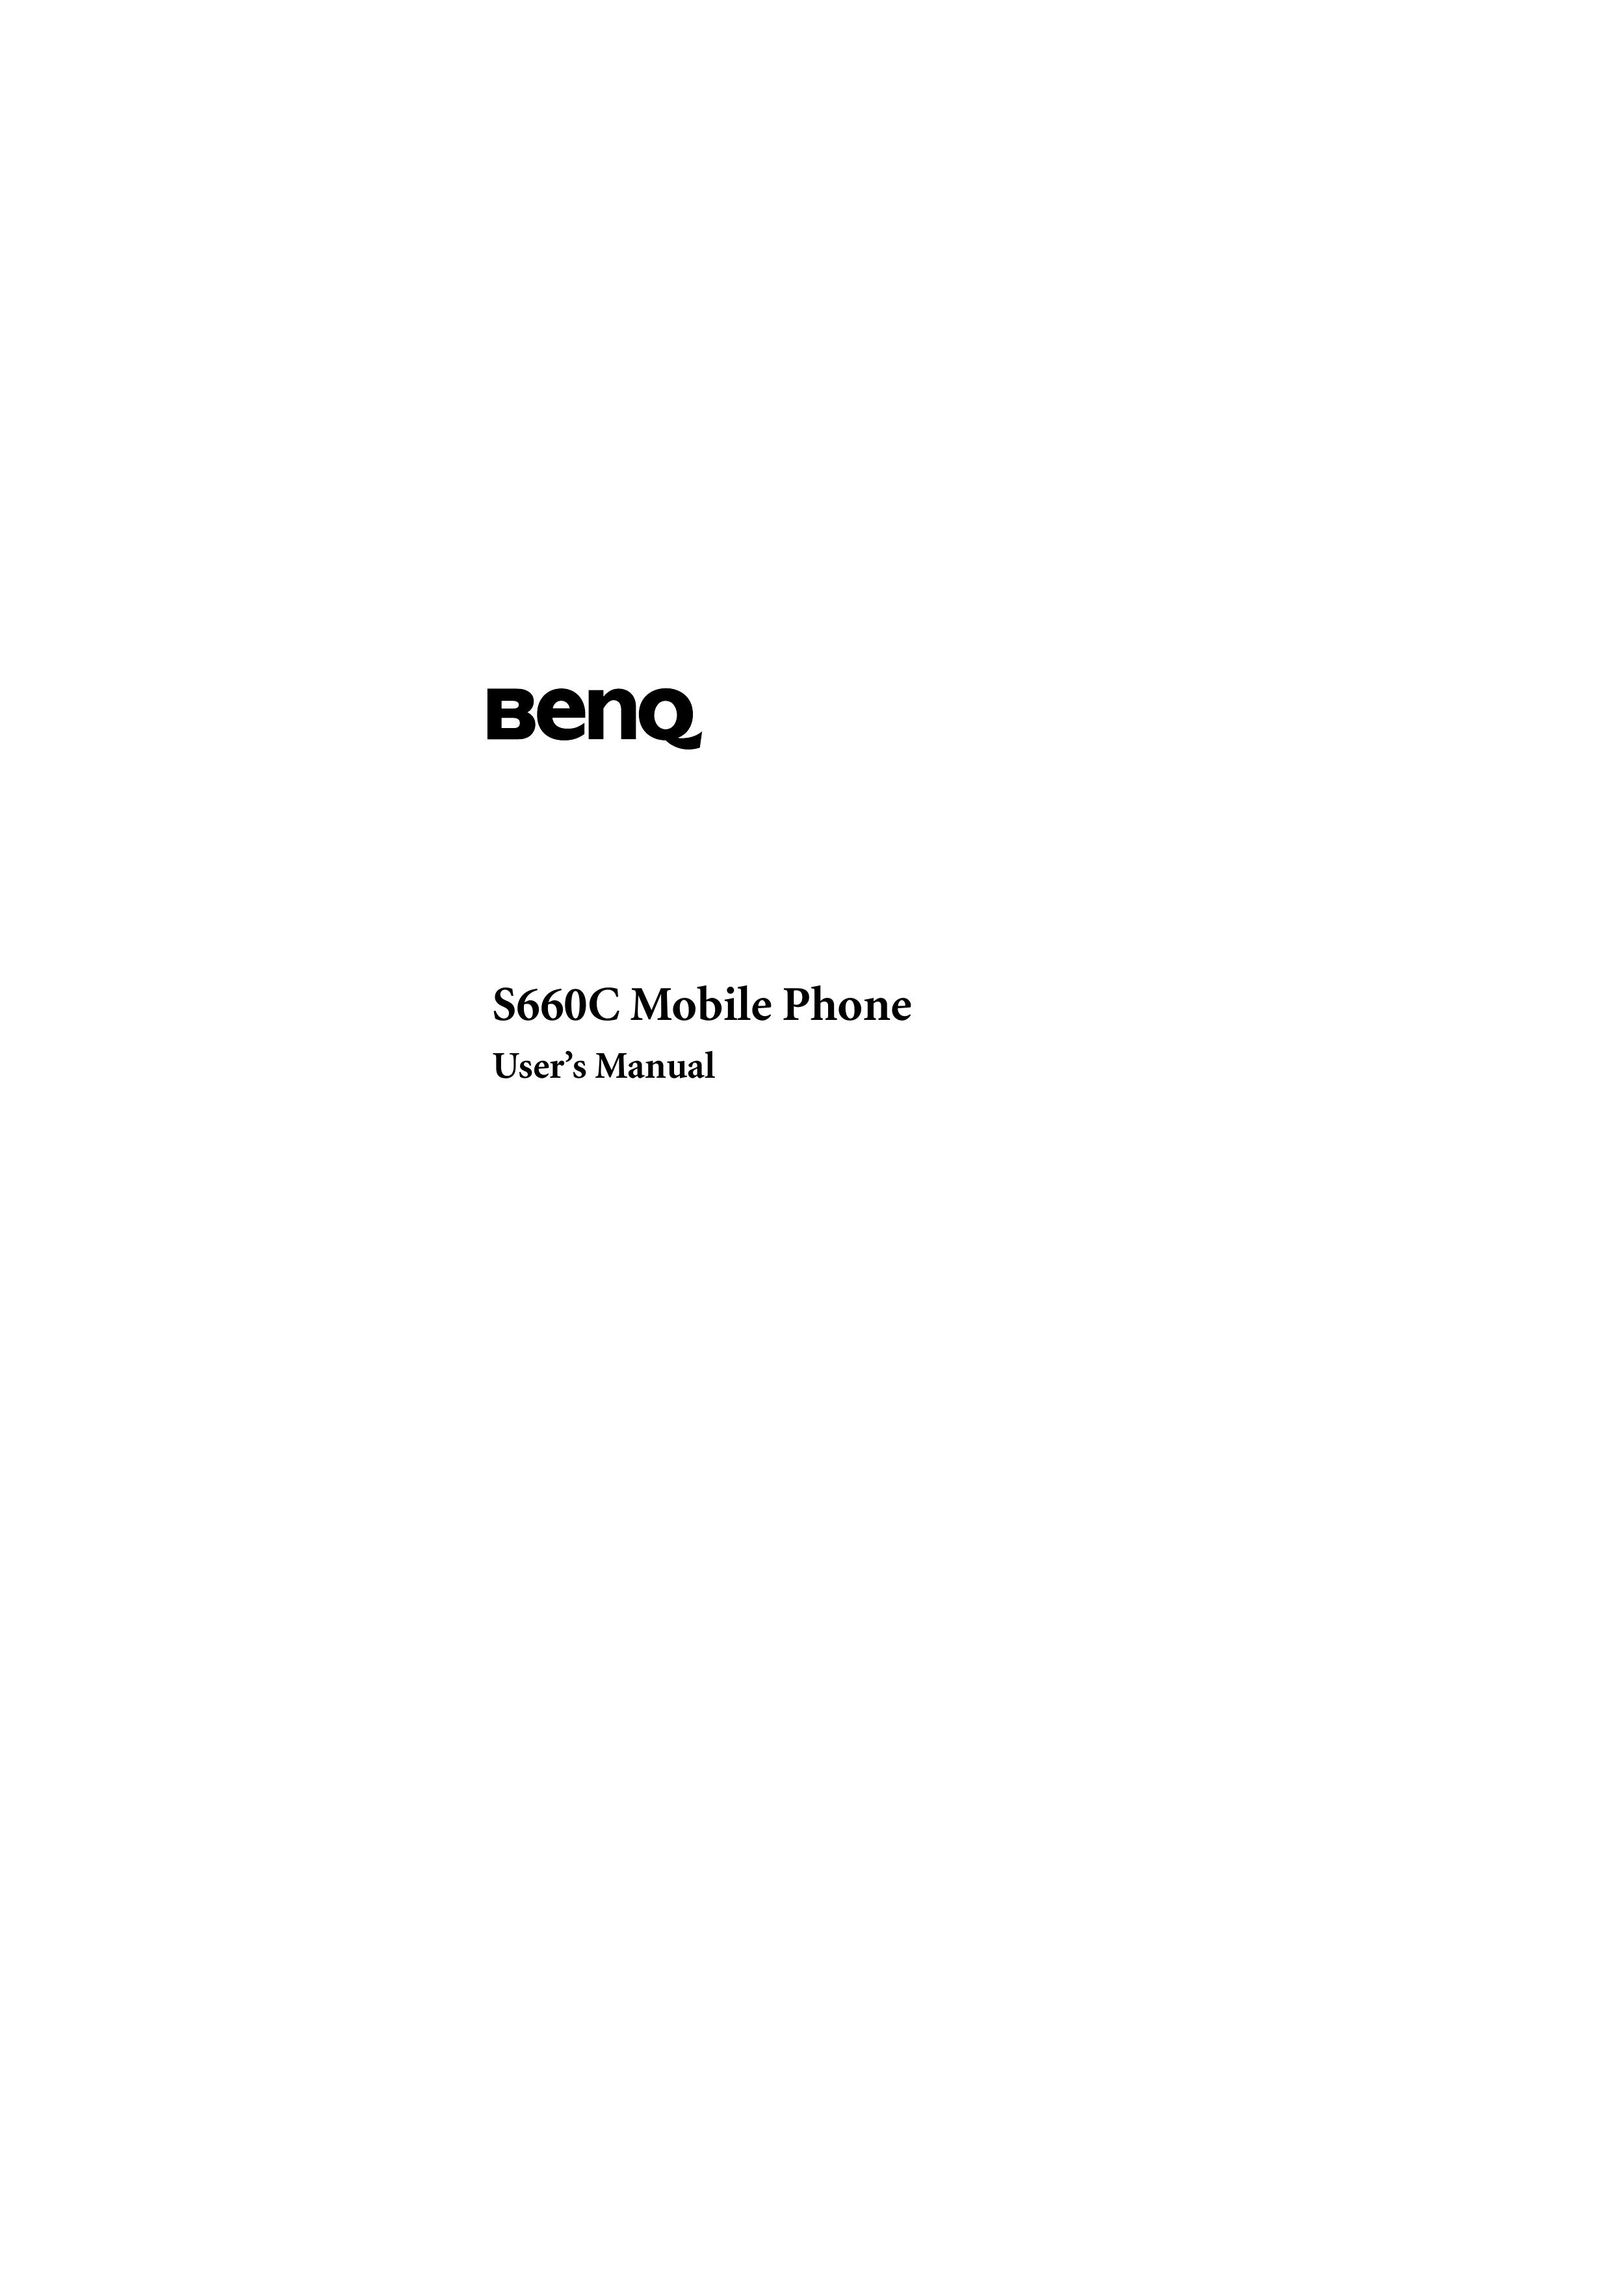 BenQ S660C Cell Phone User Manual (Page 1)